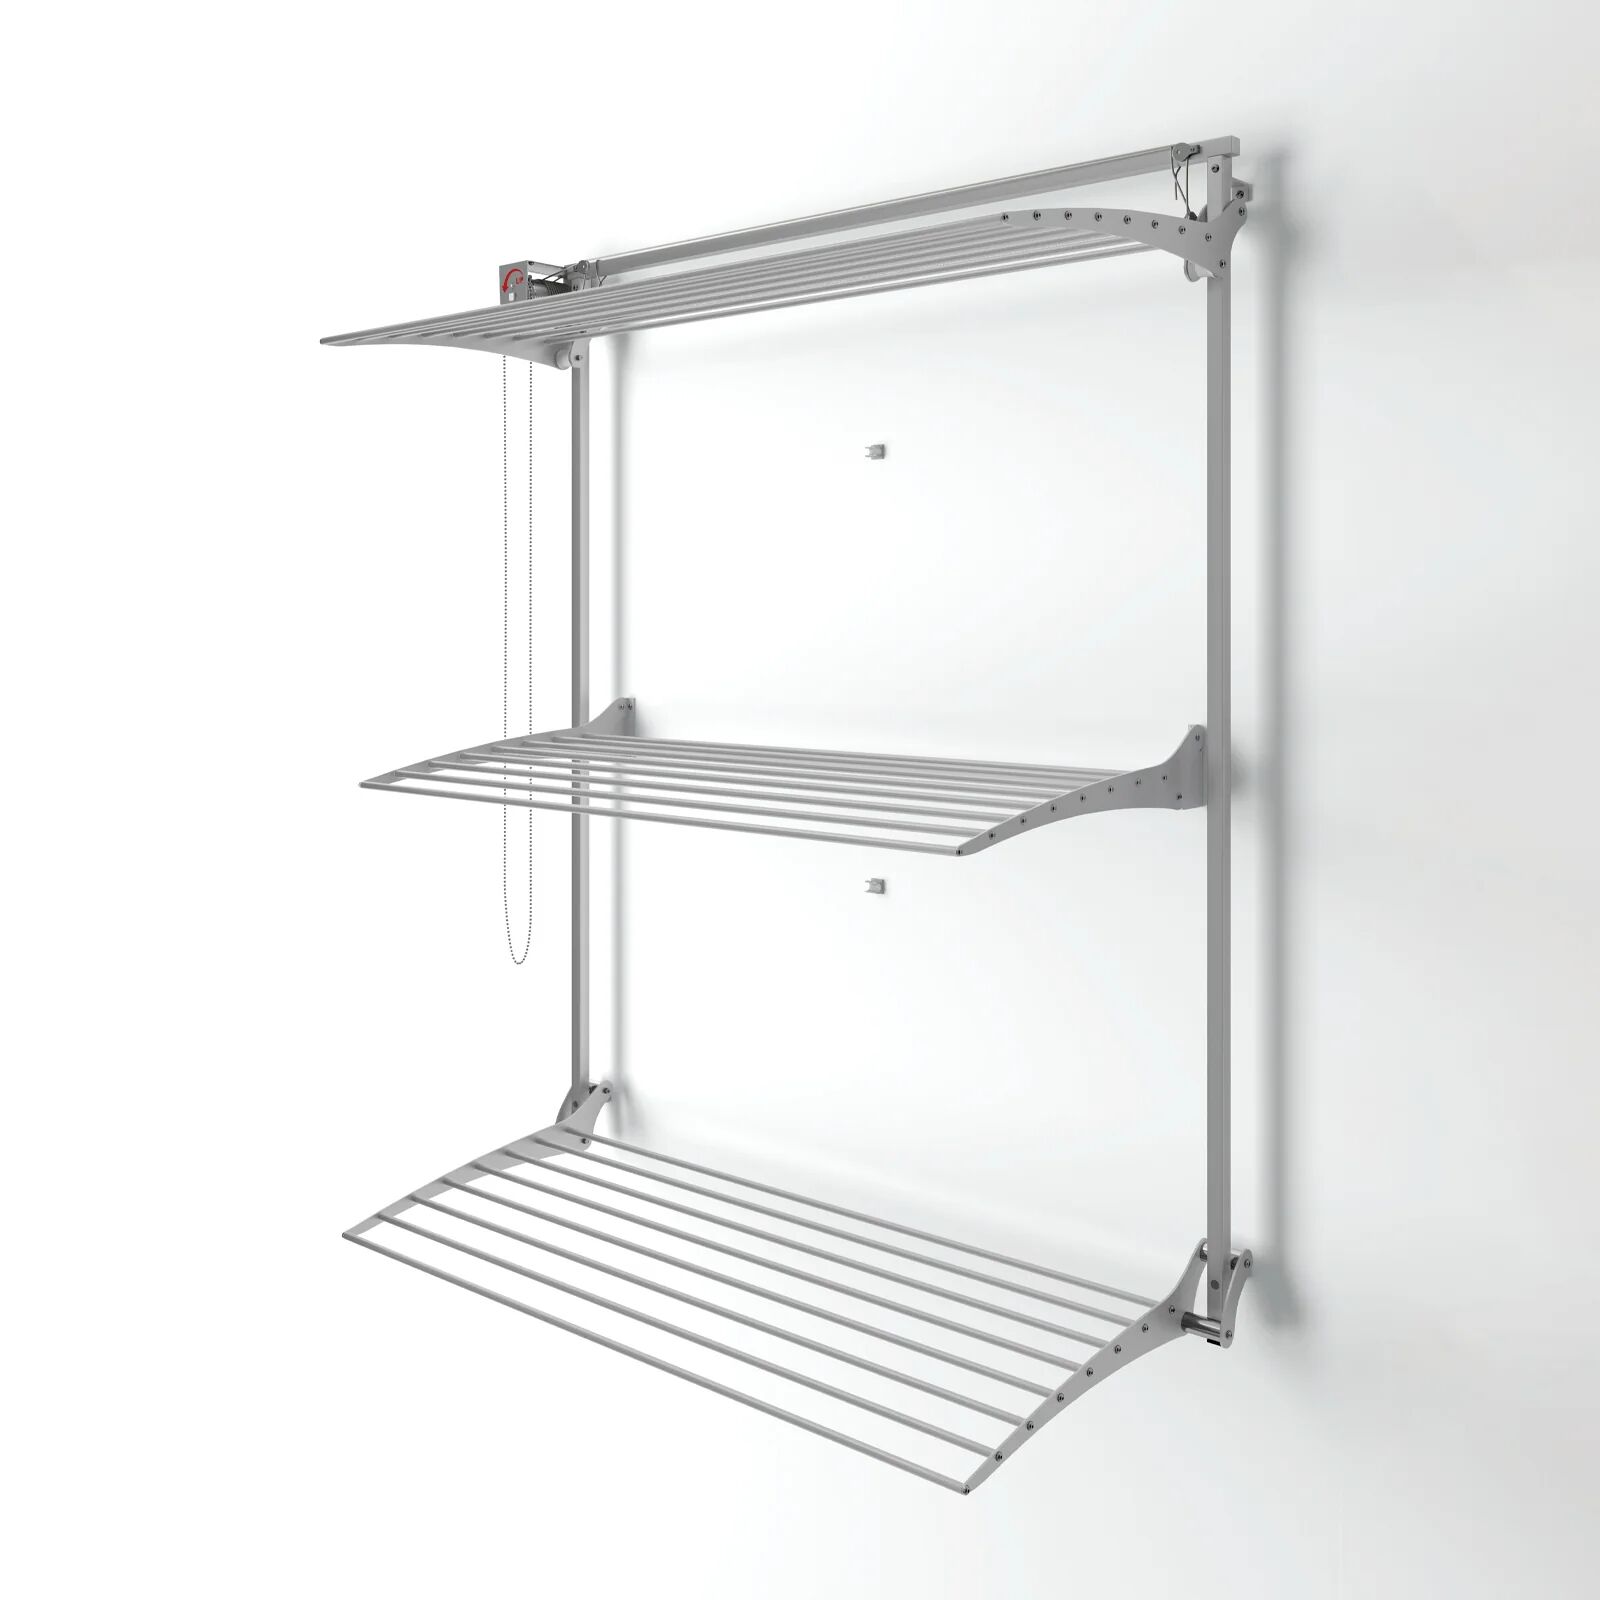 Foxydry Tower 80 tower clothes airer with foldable racks